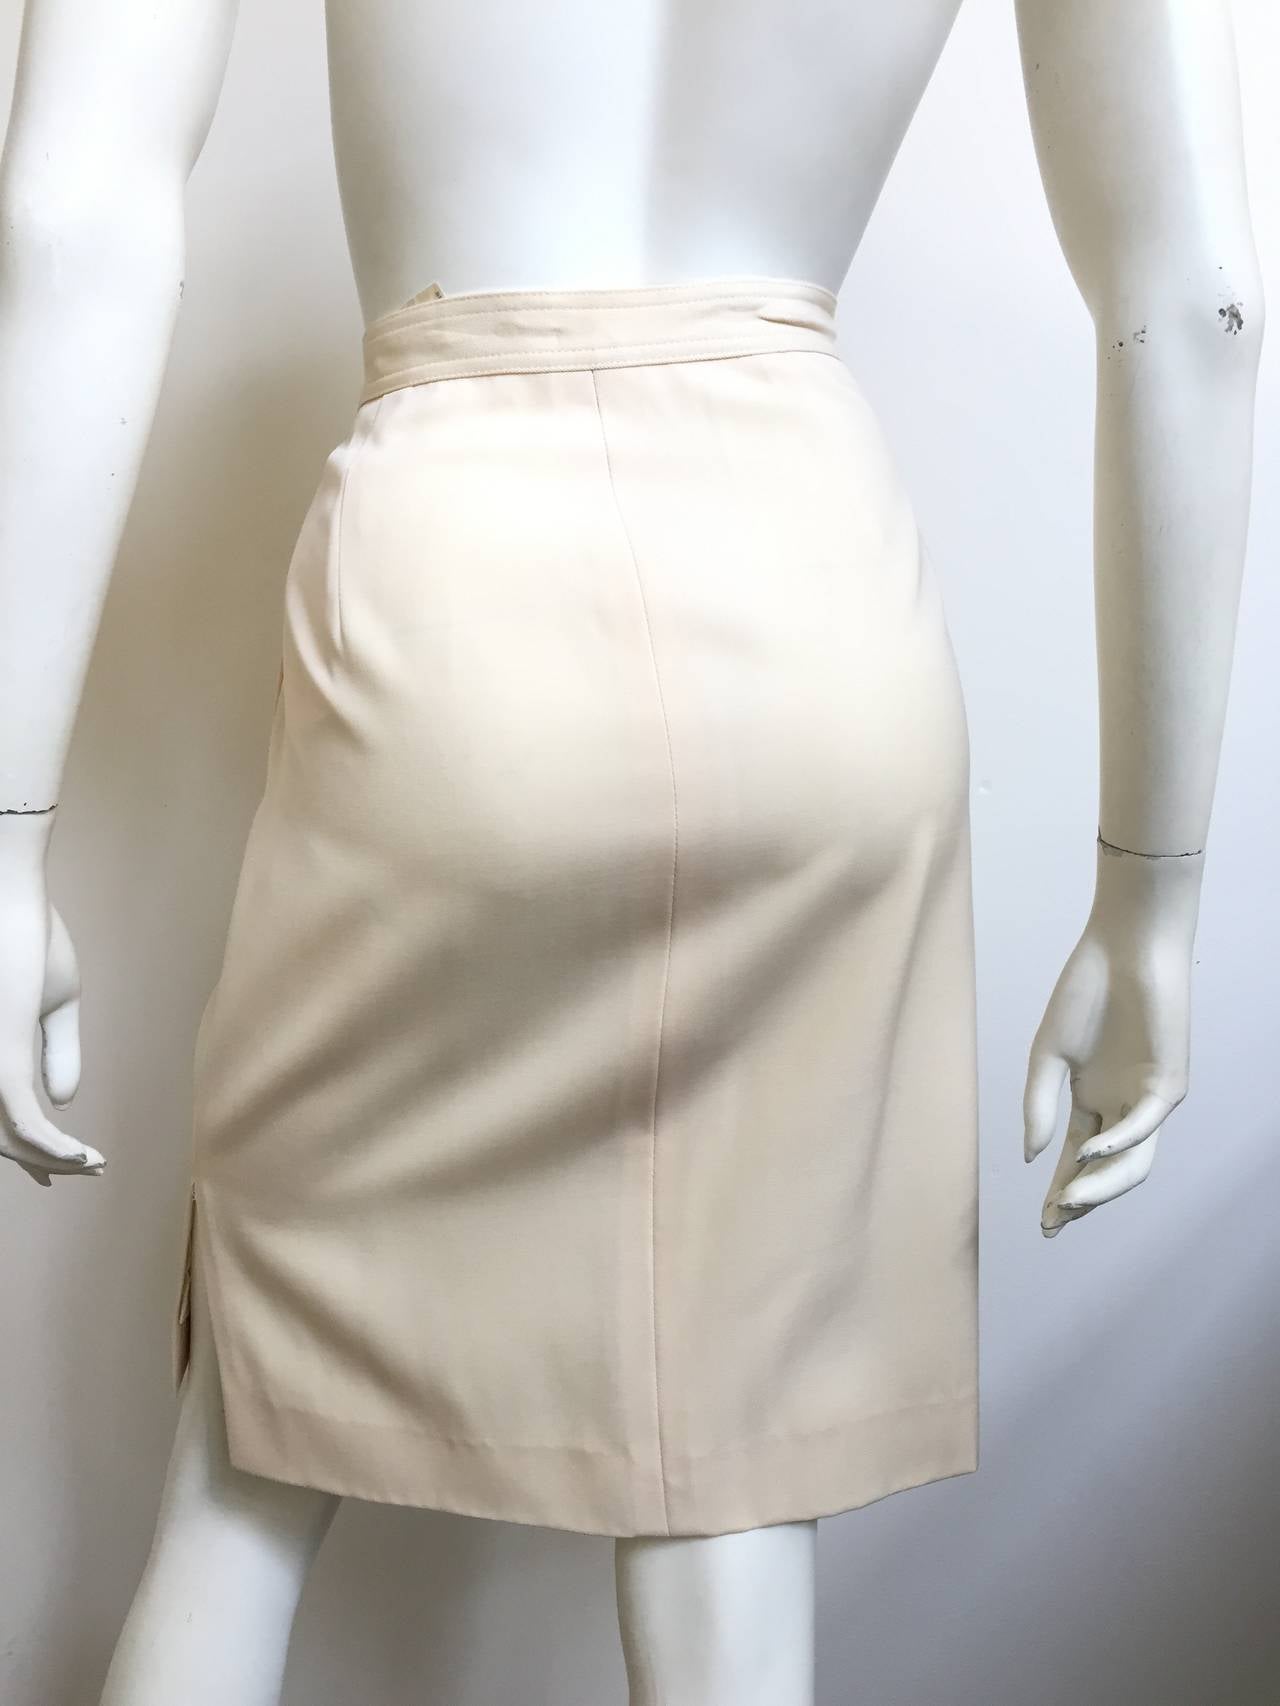 Valentino Cream Wool Skirt Size 6. In Excellent Condition For Sale In Atlanta, GA